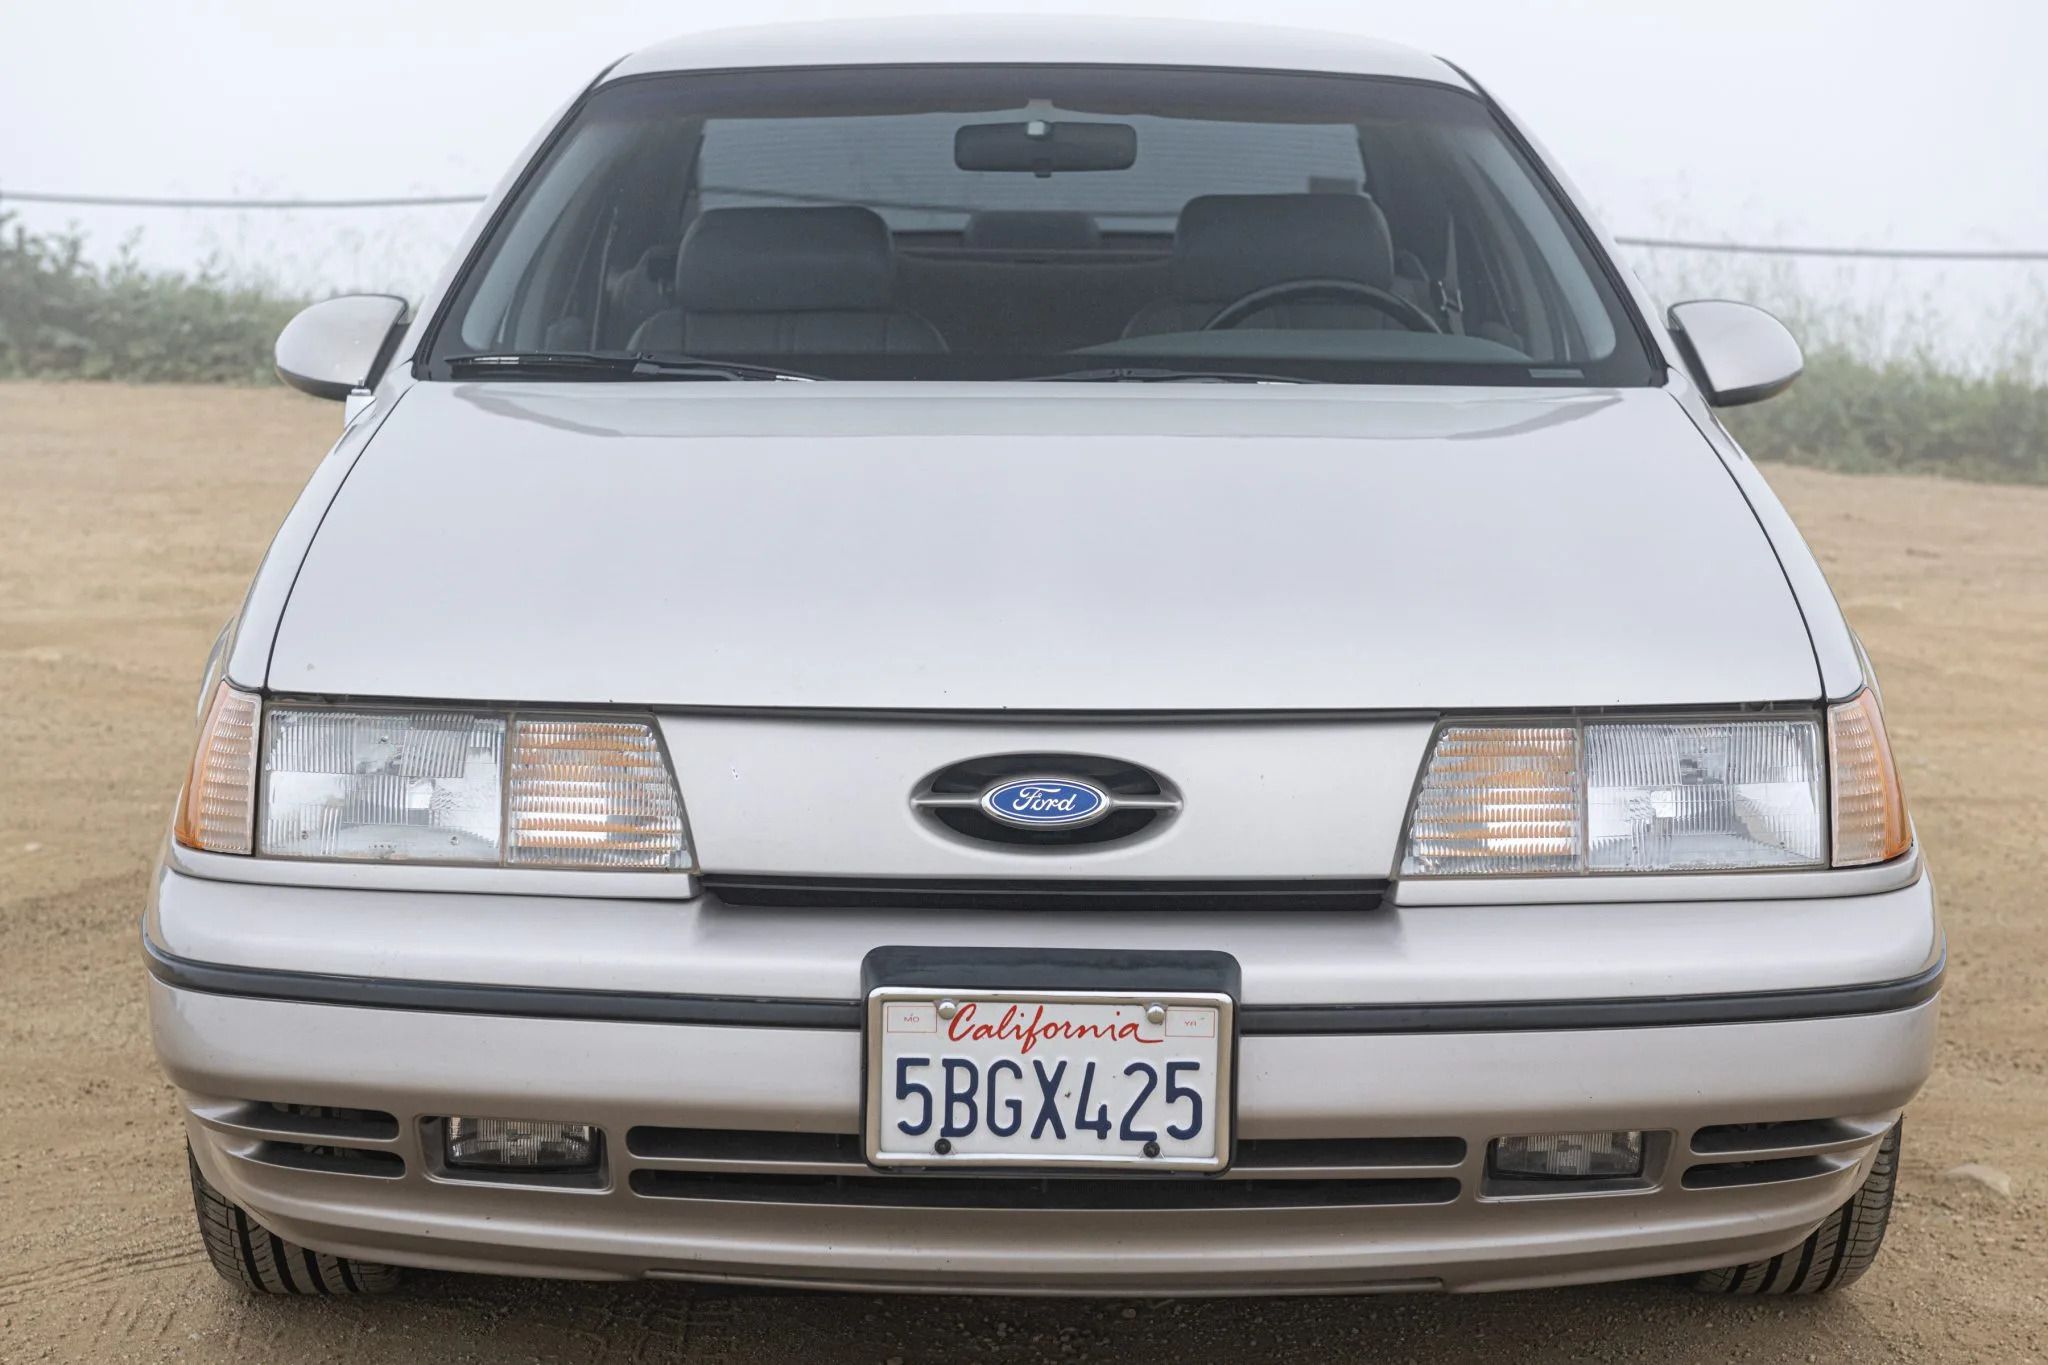 No Reserve: 18k-Mile 1990 Ford Taurus SHO 5-Speed For Sale, 60% OFF